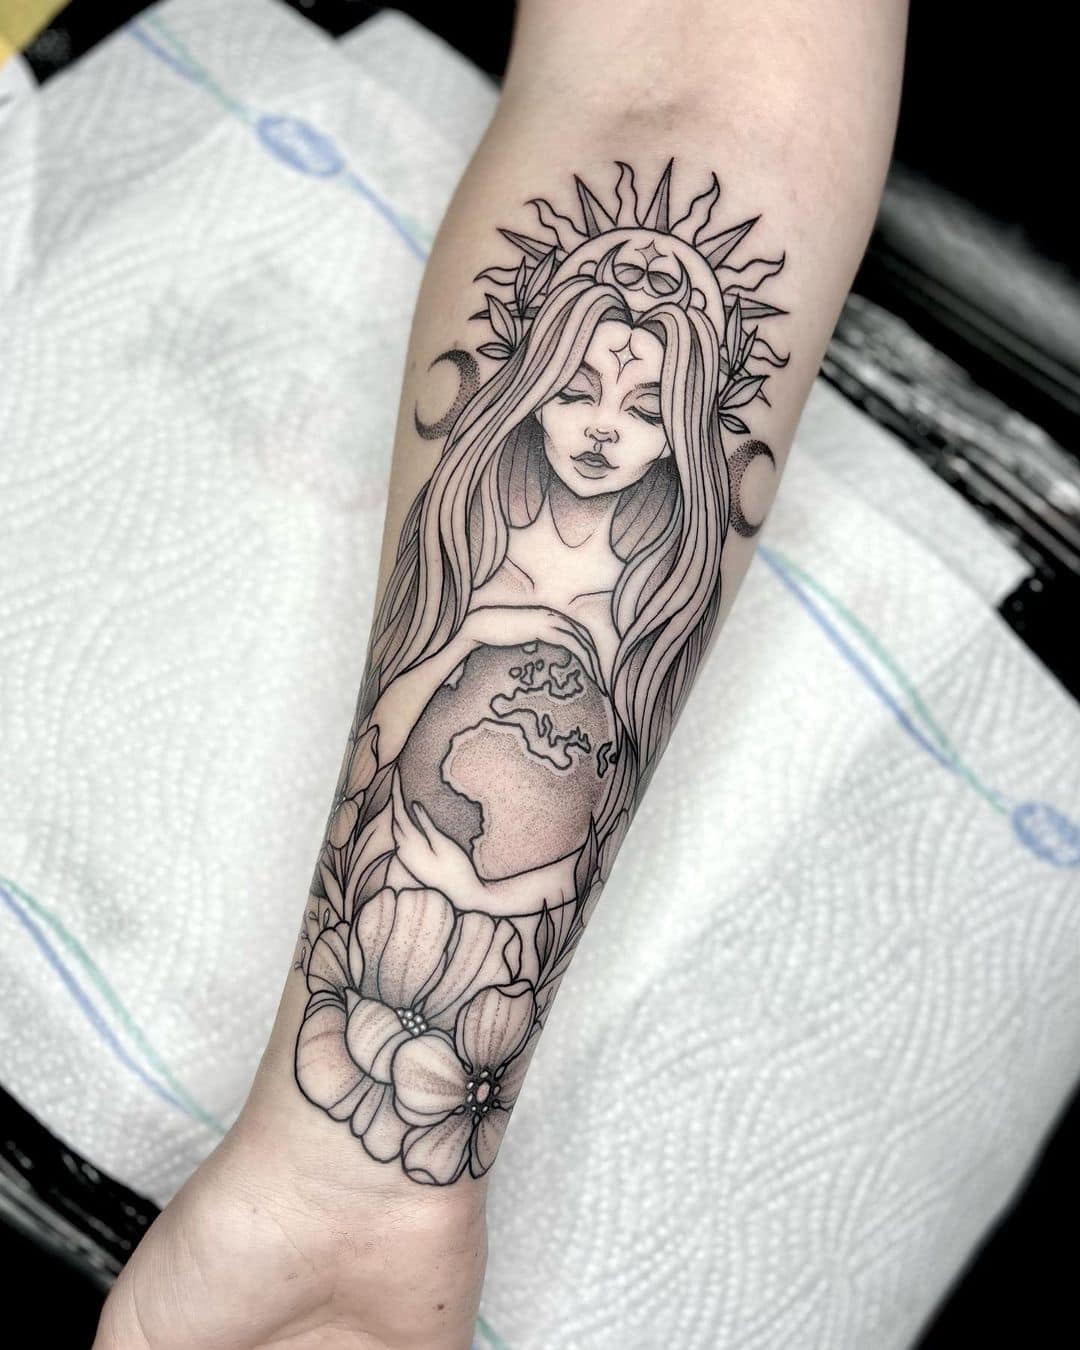 101 Best Aphrodite Tattoo Ideas You'll Have To See To Believe!